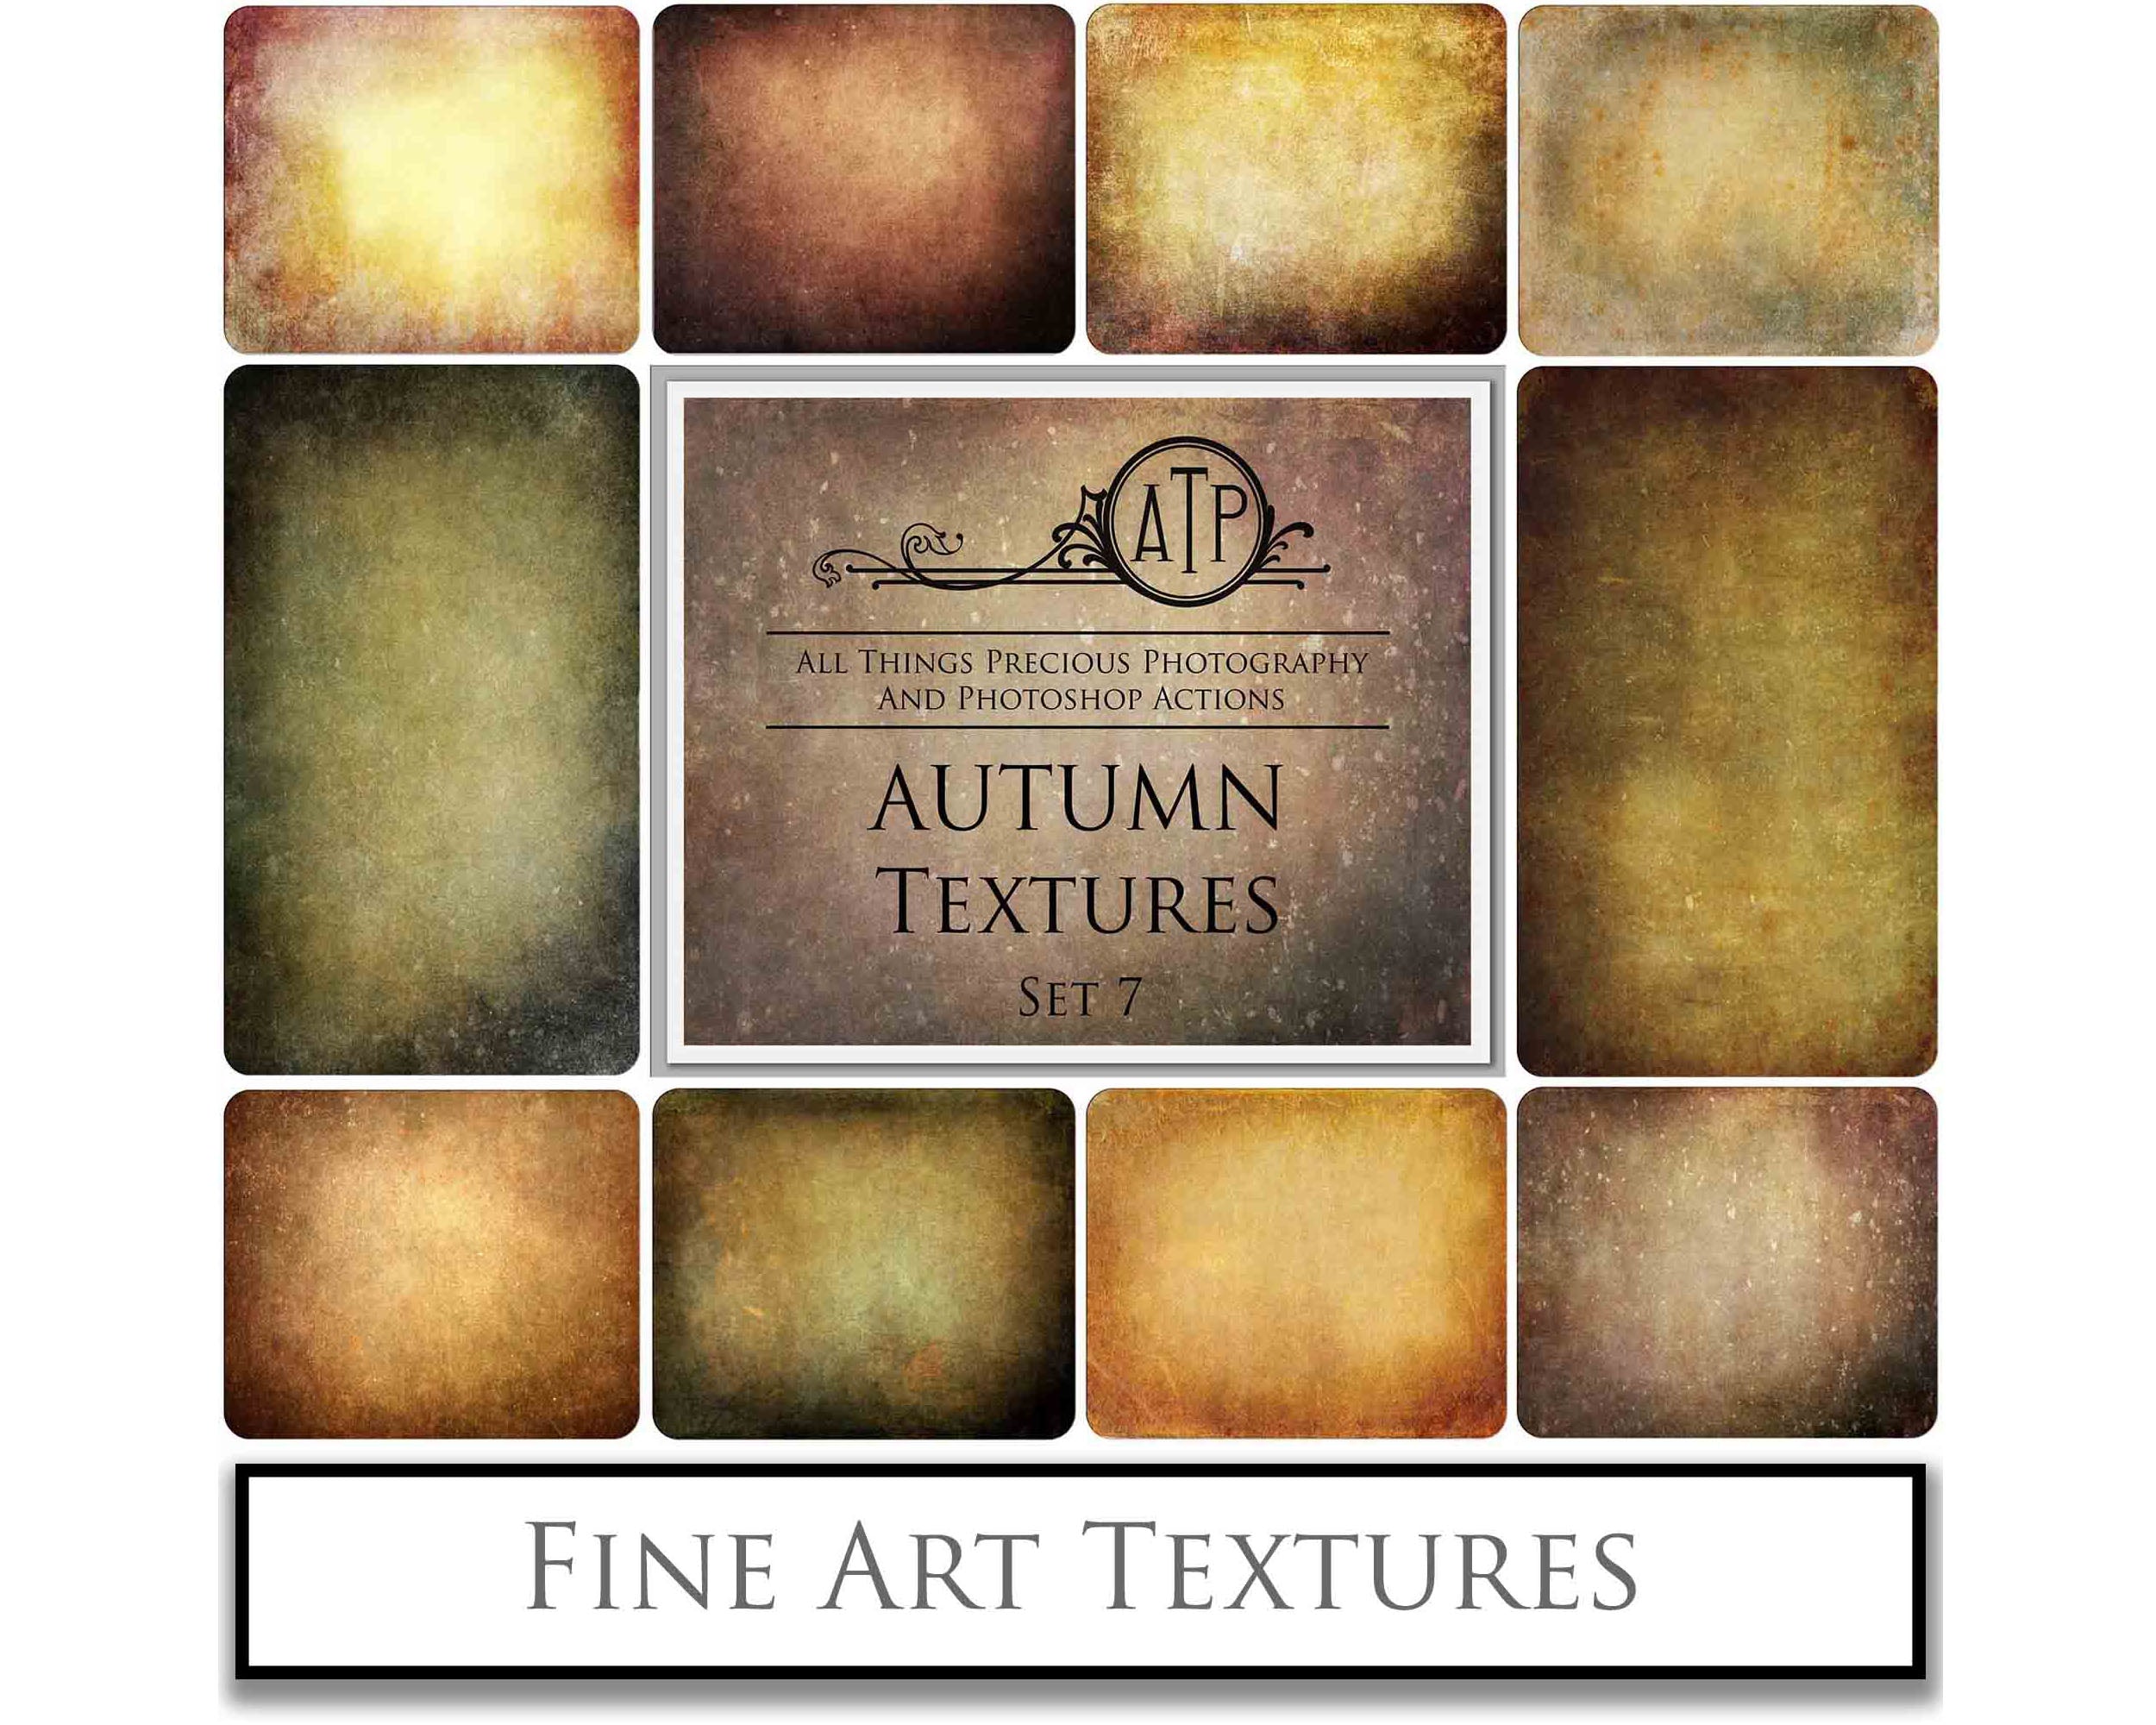 Fine Art Textures. For photography or print as backdrops. High resolution download files. Grunge, Warm, Light, Digital Add Ons. Canvas, Dark, Painterly, Color design. Jpeg overlay. photoshop editing graphic assets. by ATP textures.